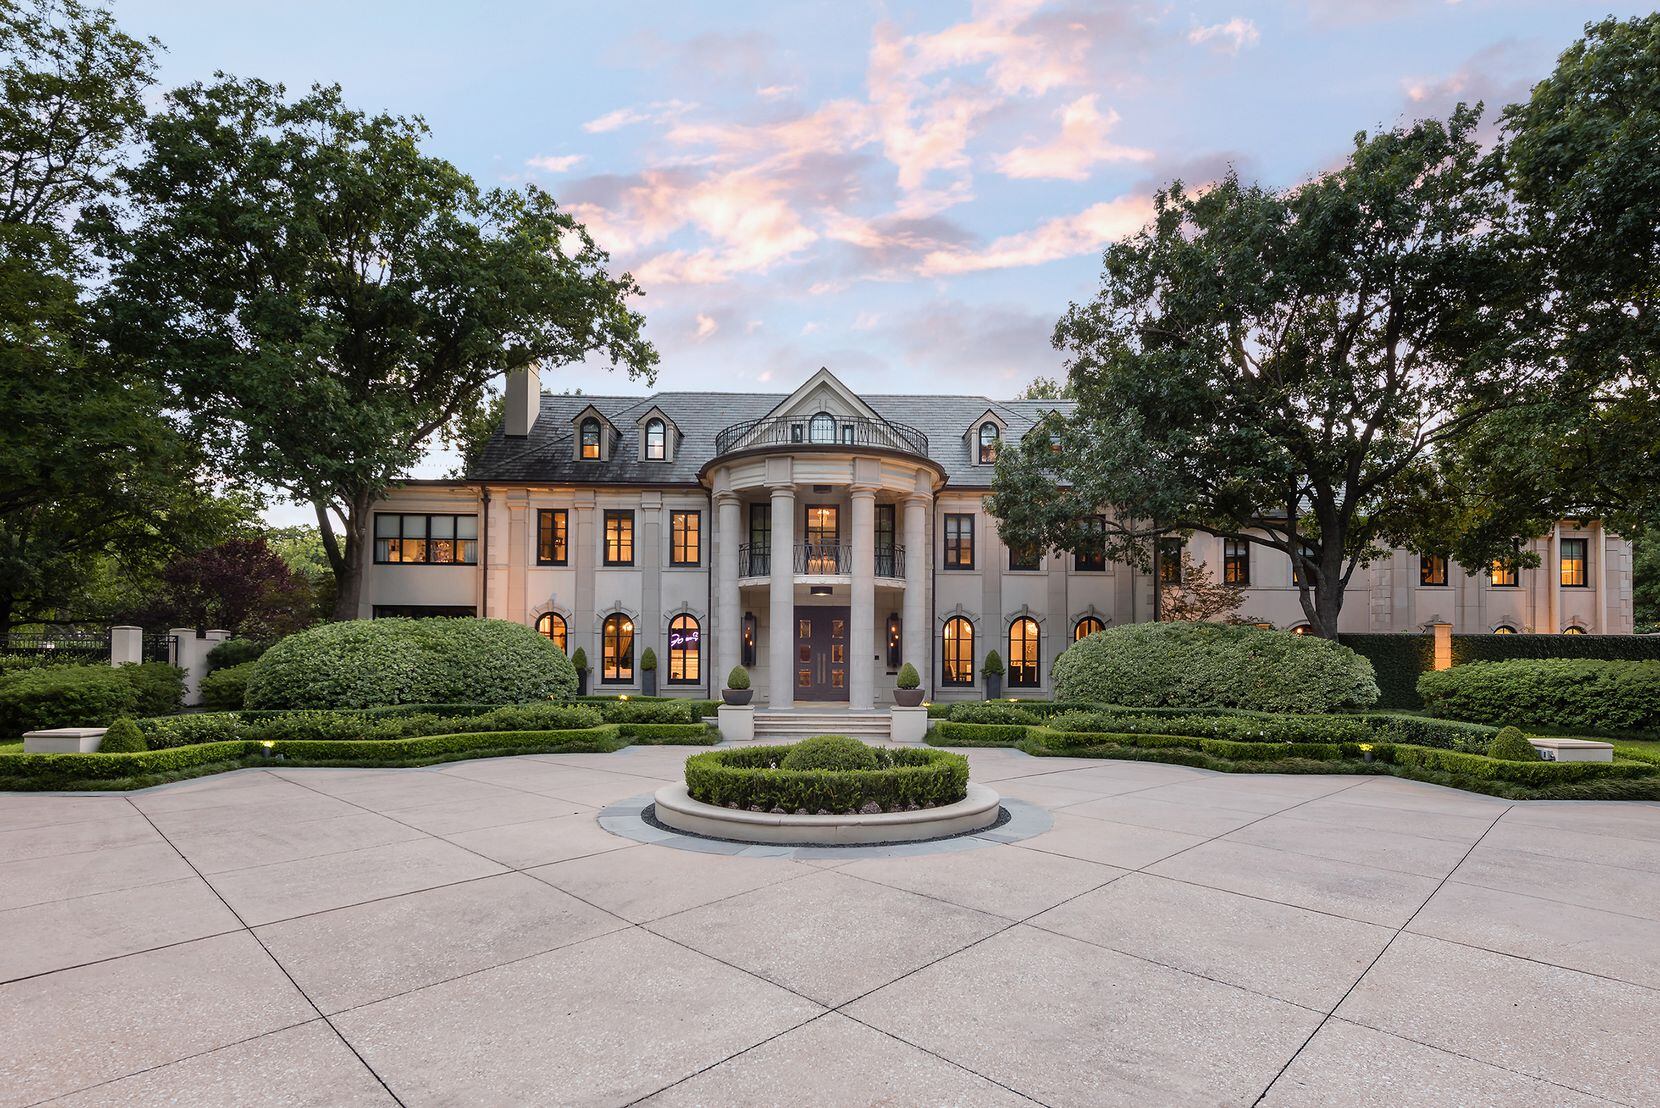 The nearly 2-acre estate at in University Park's Volk Estates neighborhood dates to the 1920s.